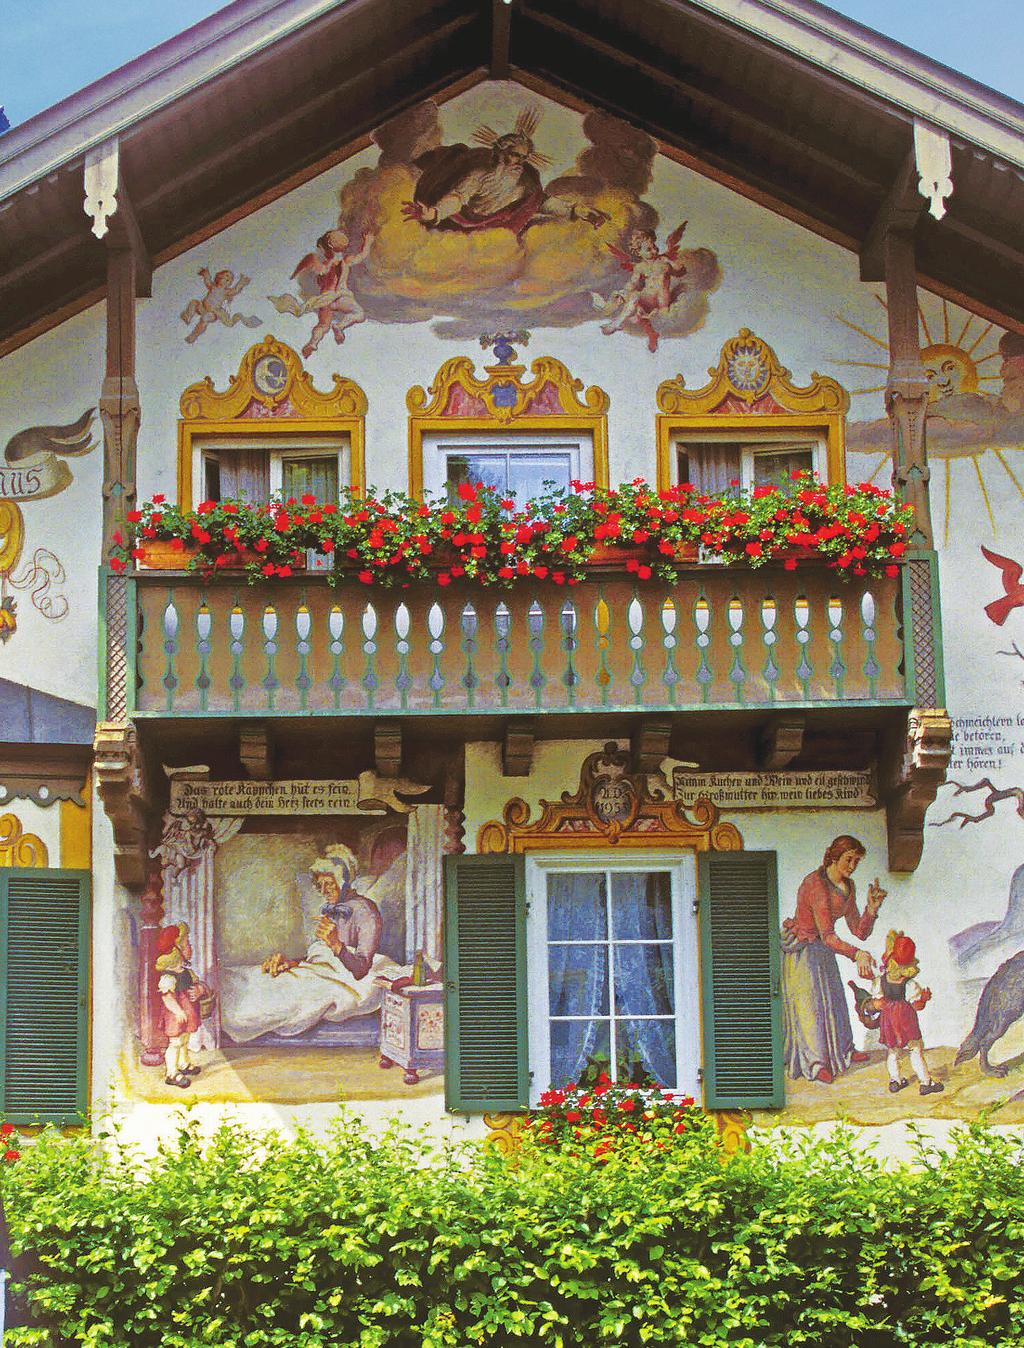 BES T OF GER MANY WITH OBERAMMERGAU DAYS COUNTRY 7 MEALS FROM A$4695pp* CIRCLE NORTH, SOUTH, EAST AND WEST TO SEE MEDIEVAL ROTHENBURG, AND THE DEVOTION OF THE VILLAGERS OF OBERAMMERGAU AT THE